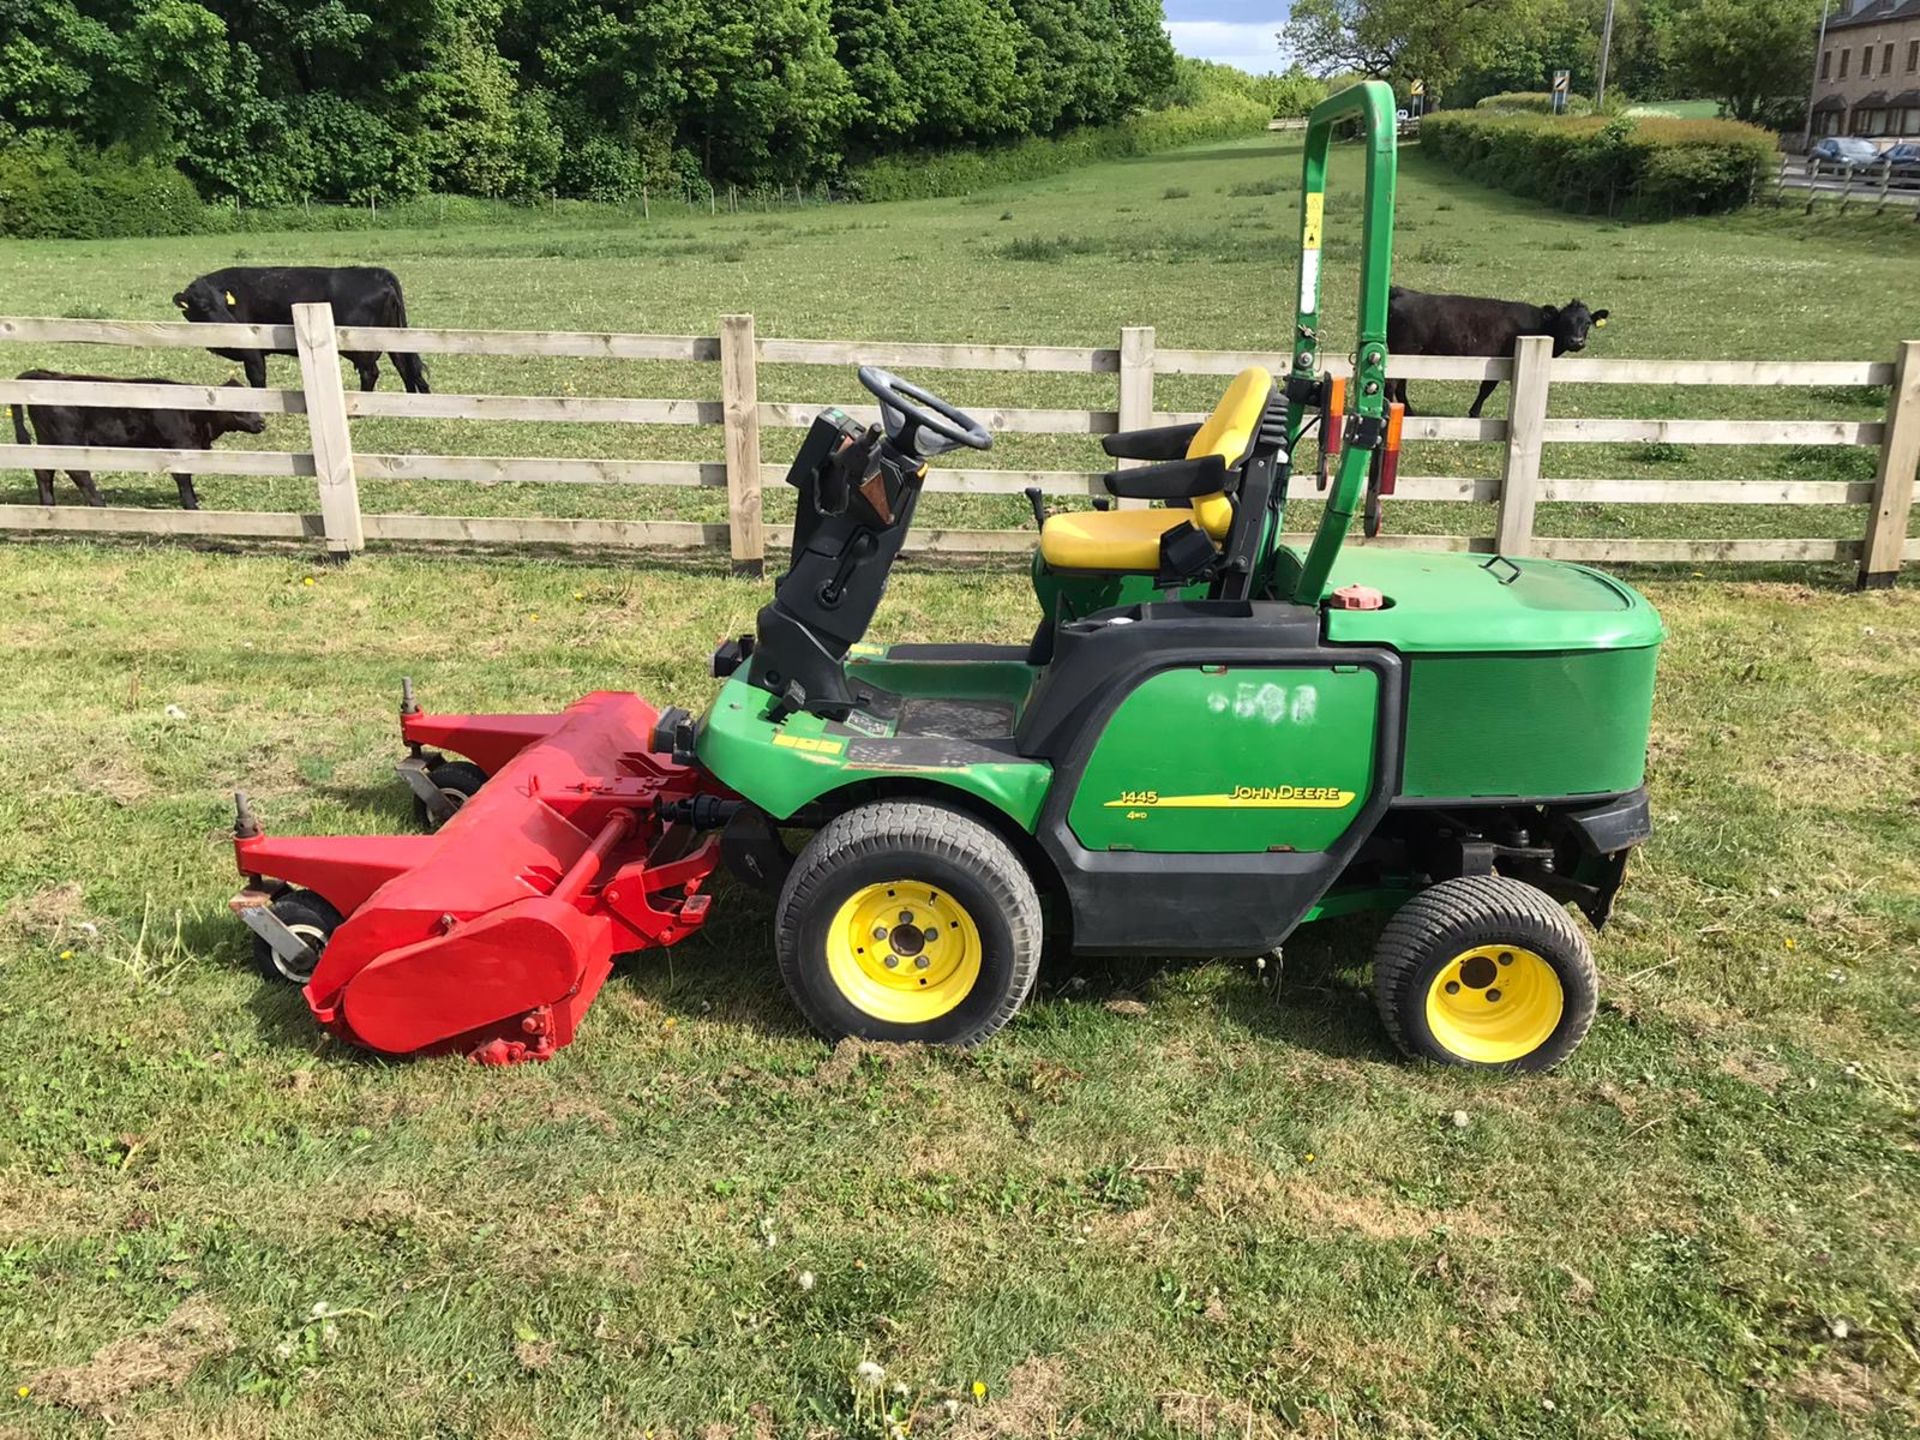 2006 JOHN DEERE 1445 4WD RIDE ON LAWN MOWER, C/W TRIMAX FLAIL, CLEAN TIDY MOWER, READY FOR WORK! - Image 6 of 11